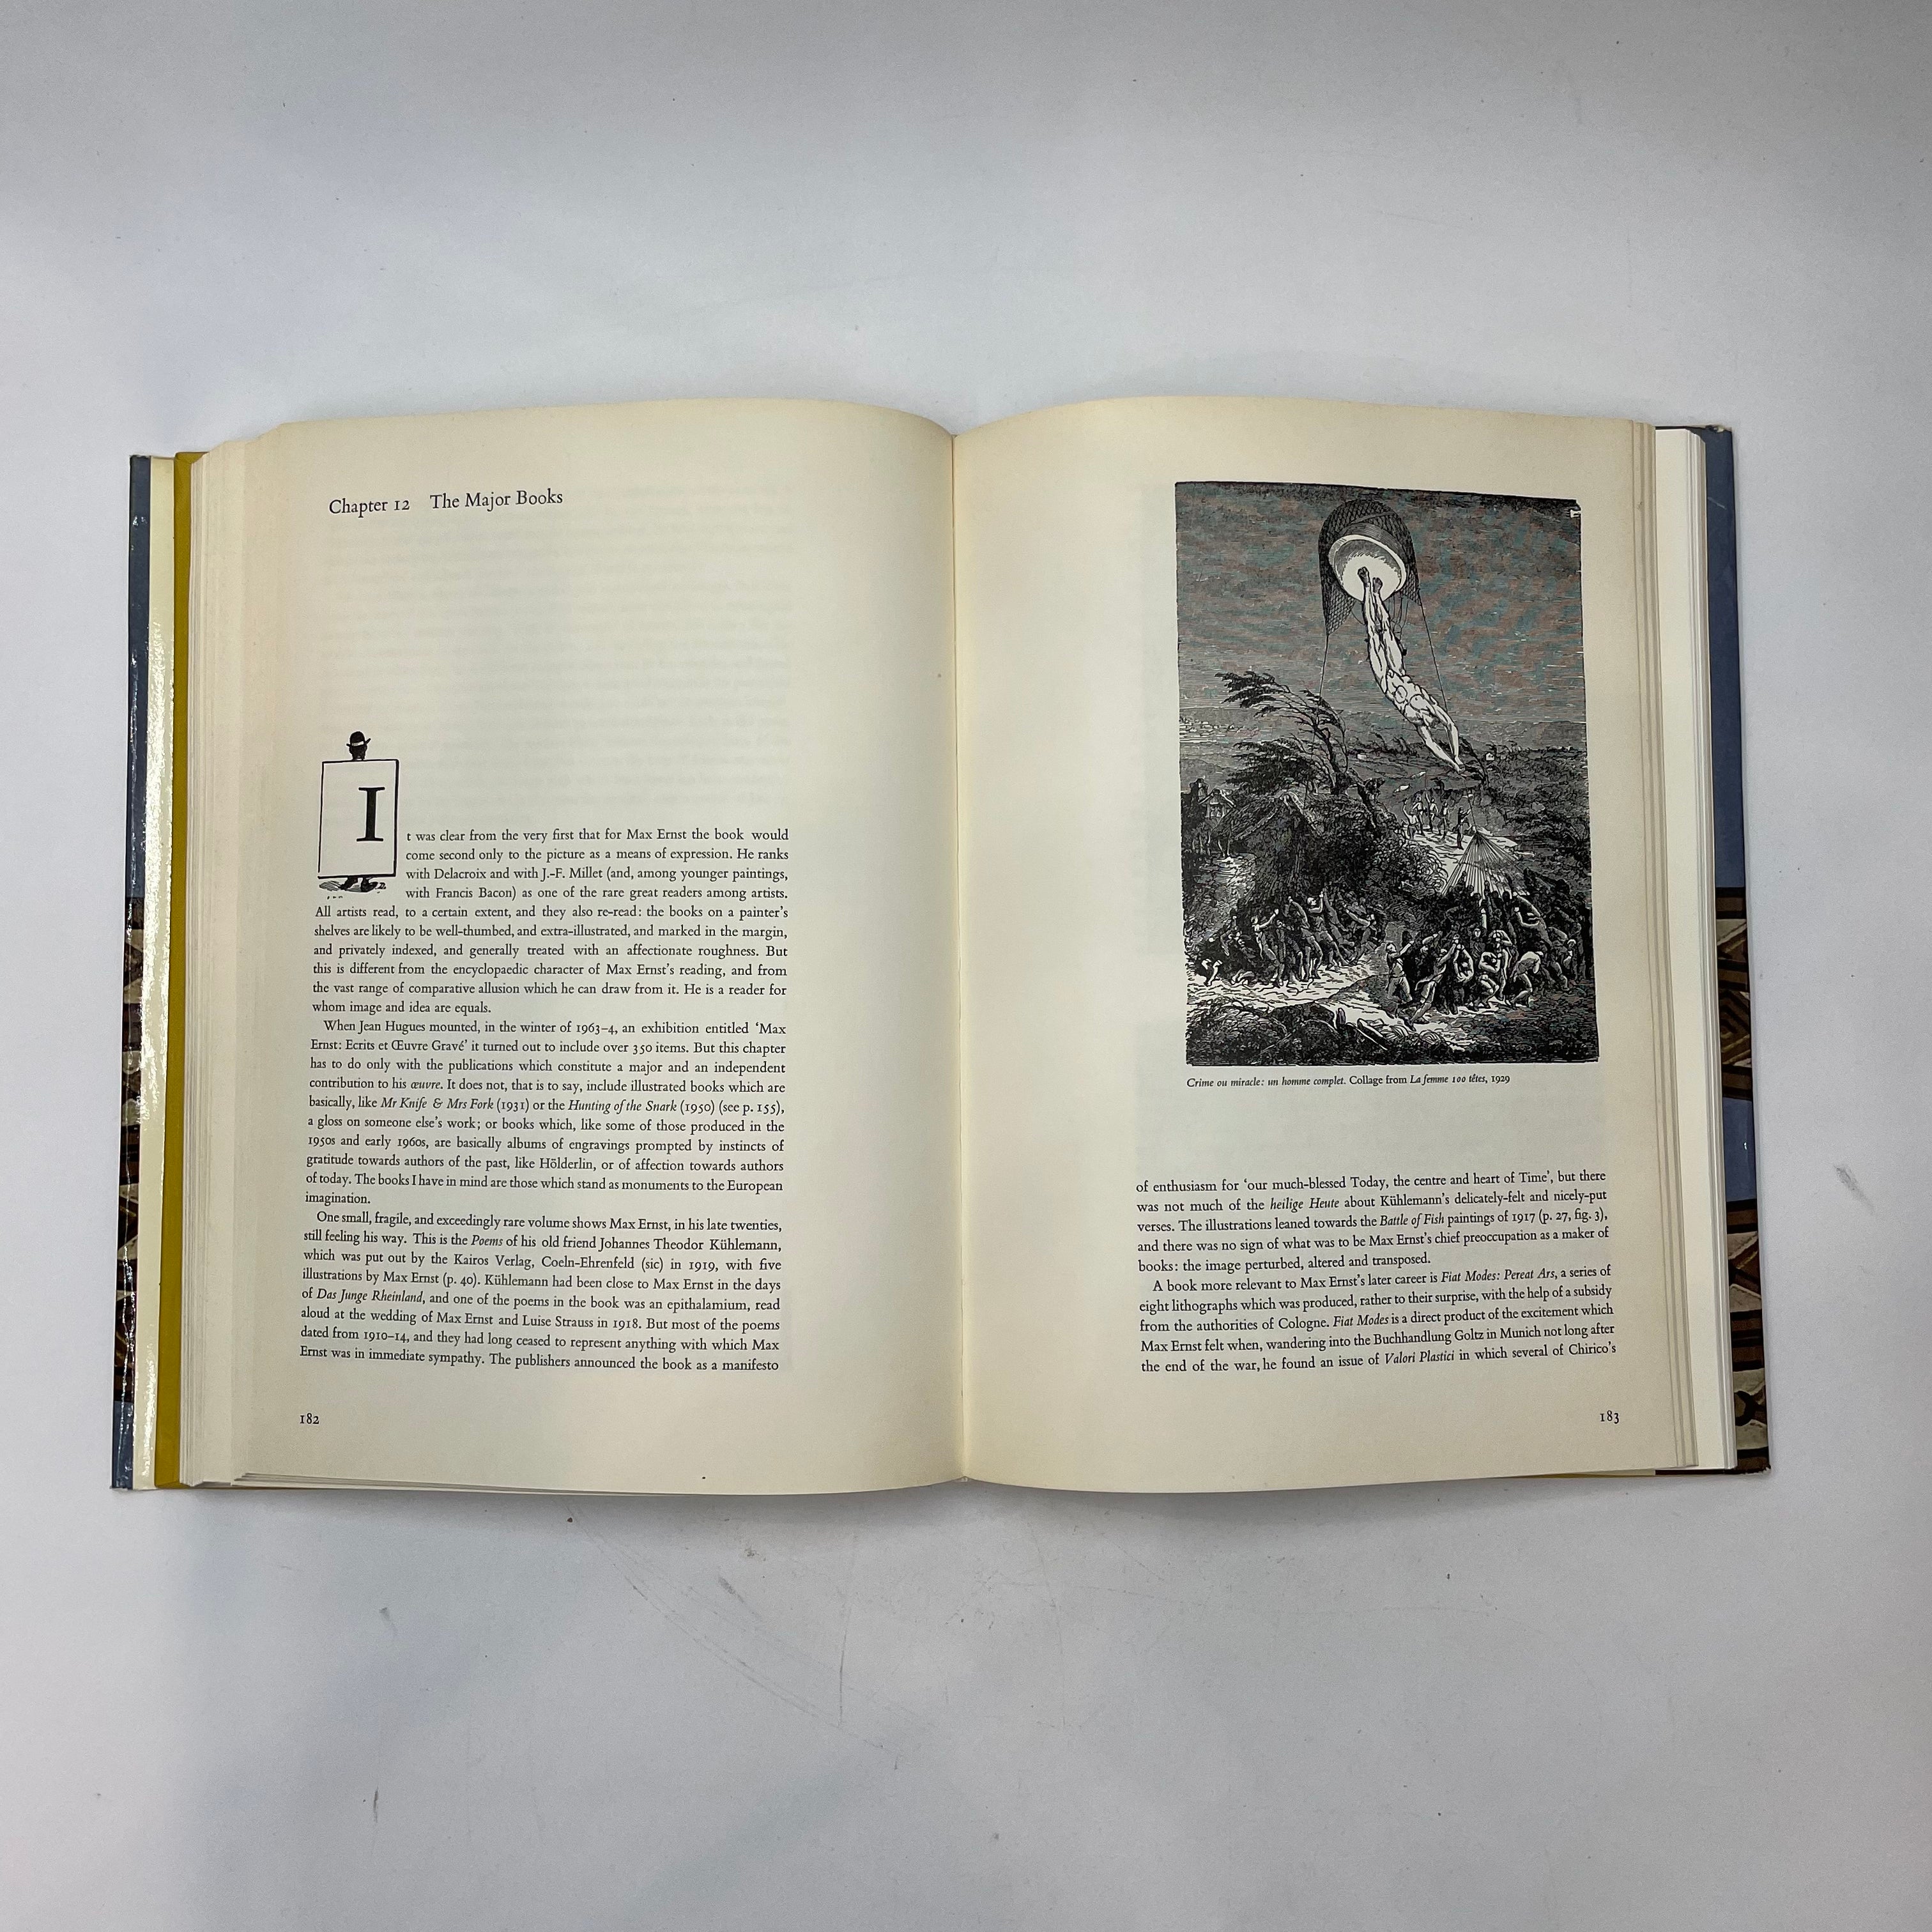 Max Ernst: Life and Work by John Russell